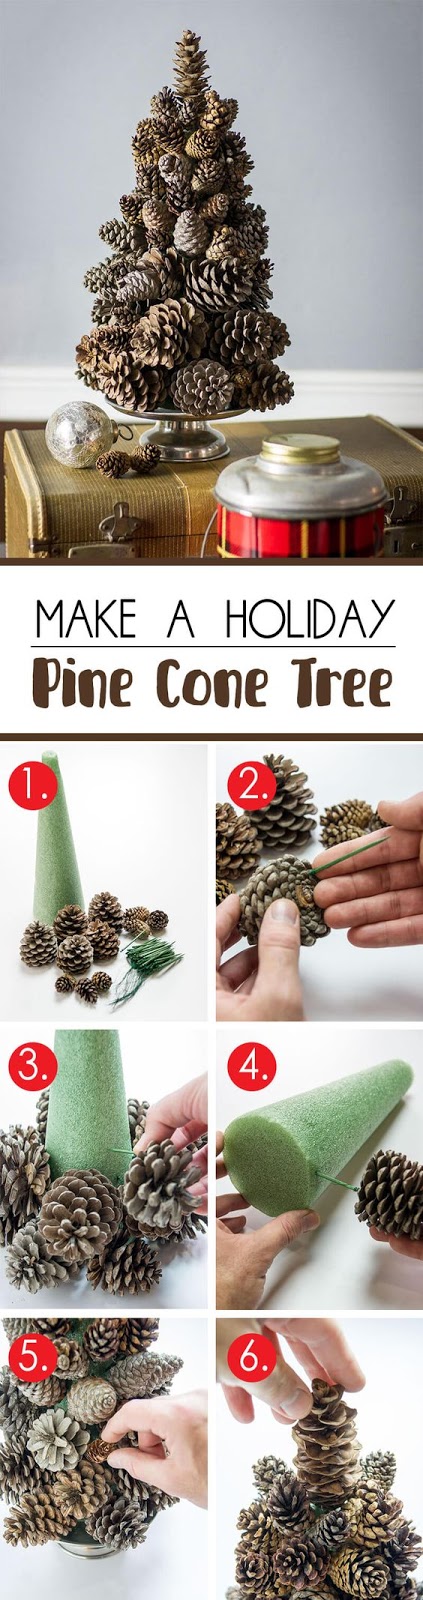 25 Beautiful DIY Pine Cone Crafts to Enjoy Making the Holiday Decoration